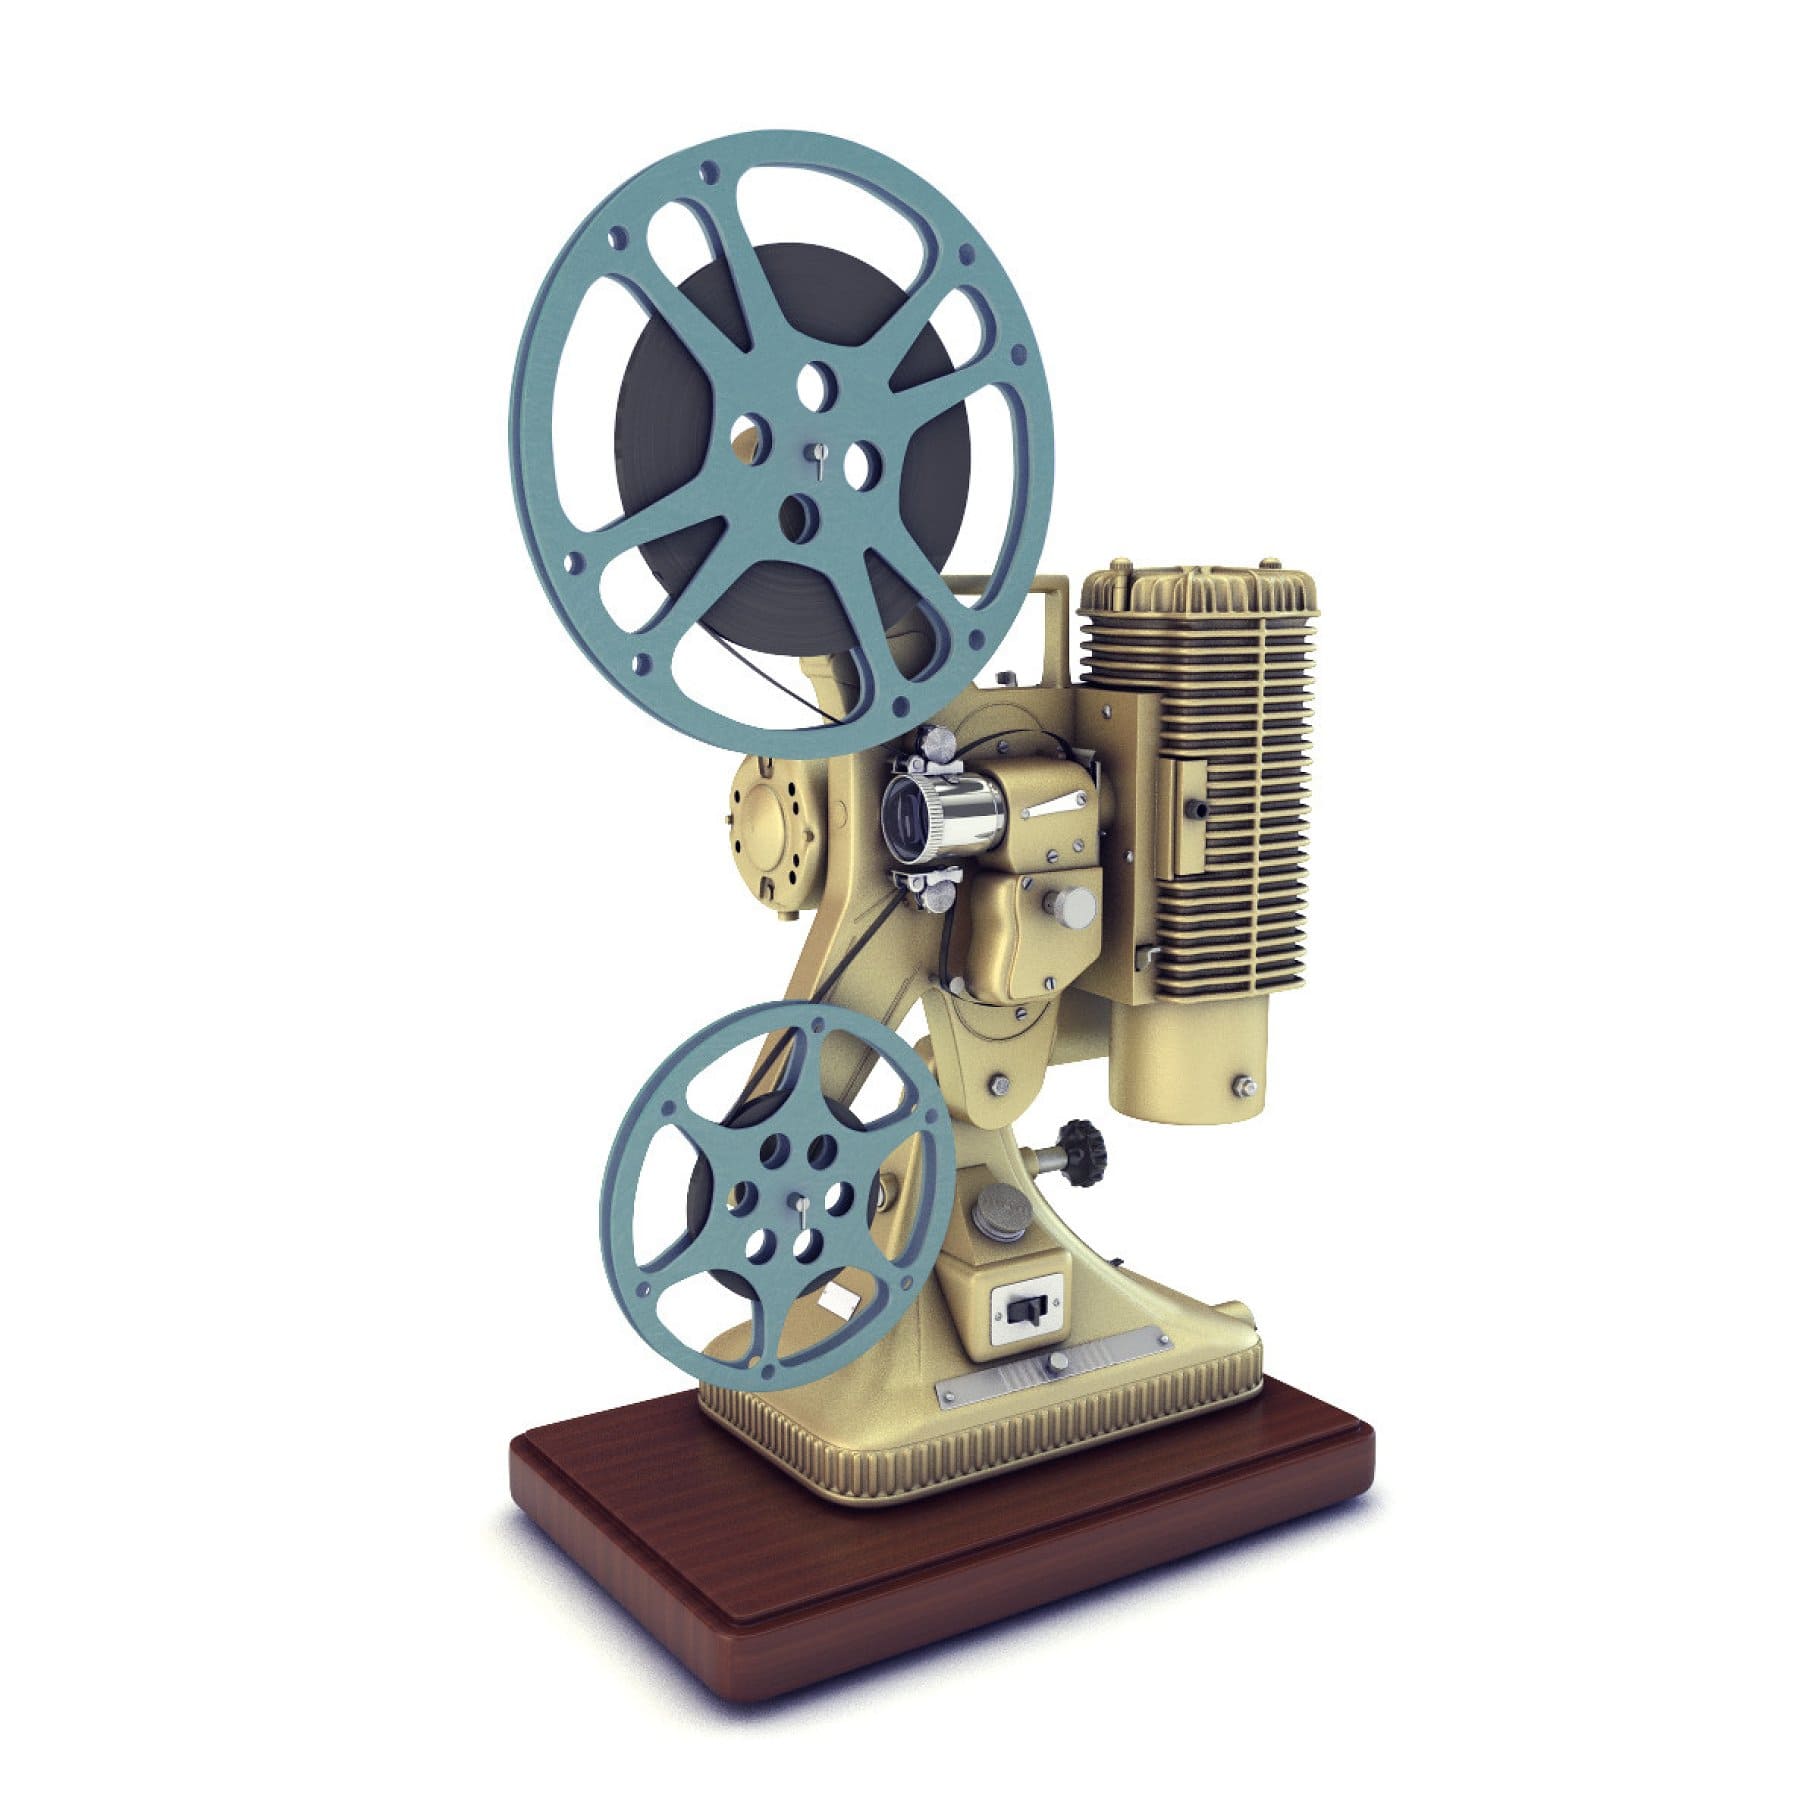 Old 8mm projector Vray.